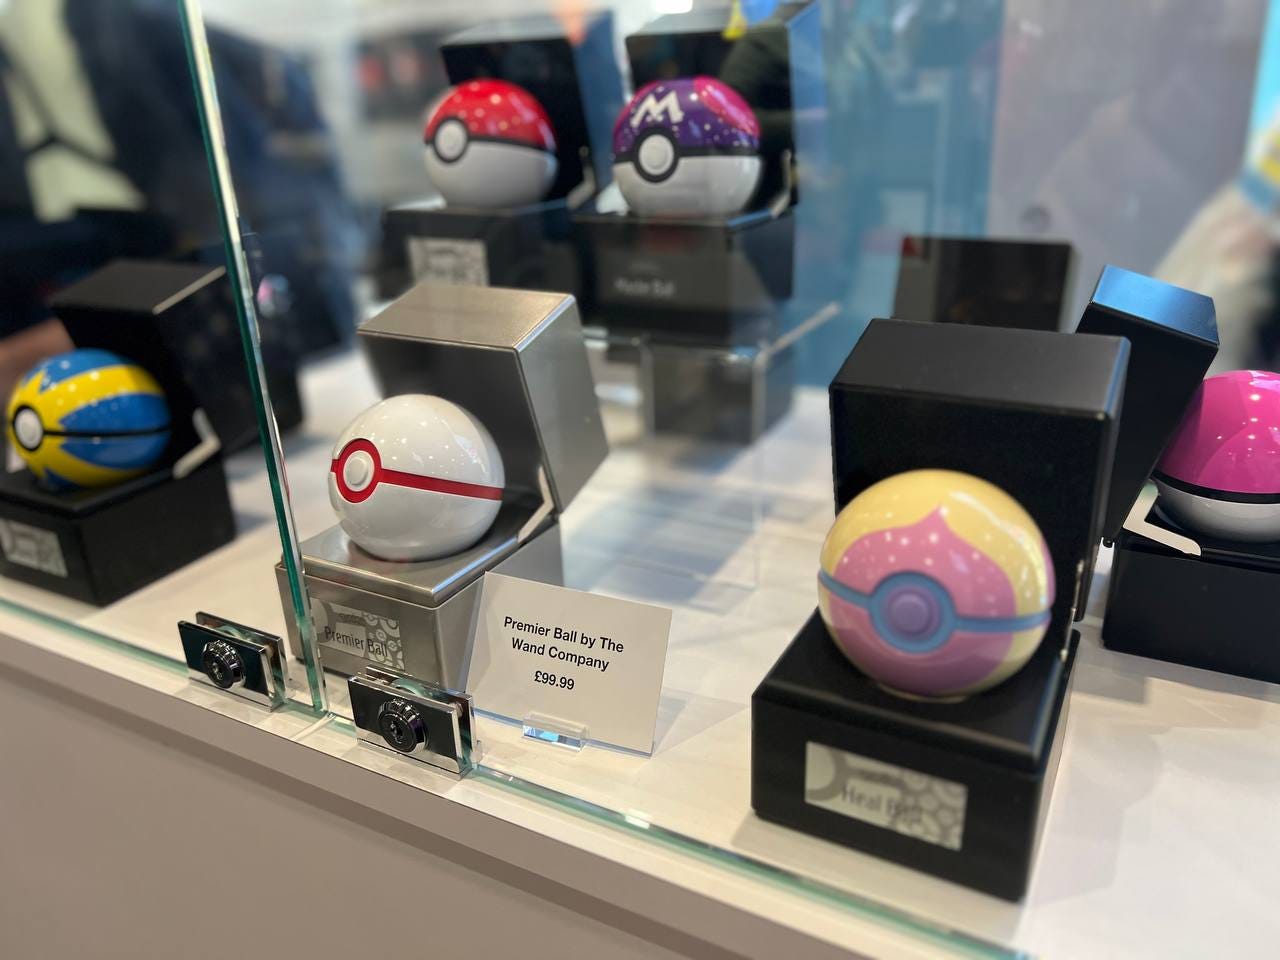 A wide selection of Pokéballs were also available from the Pokémon Center pop-up store